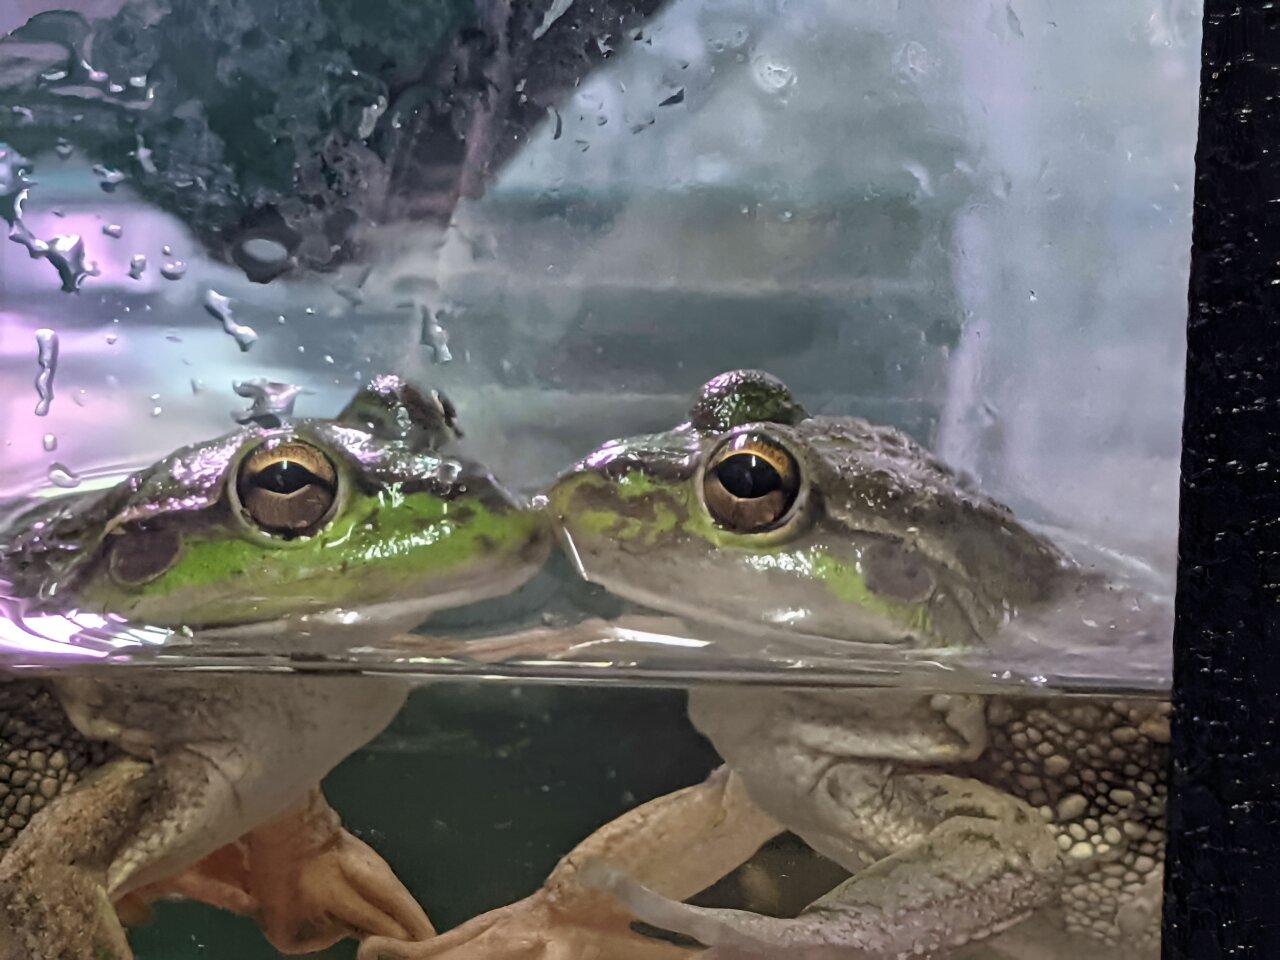 Experts determine best way to breed frogs in captivity